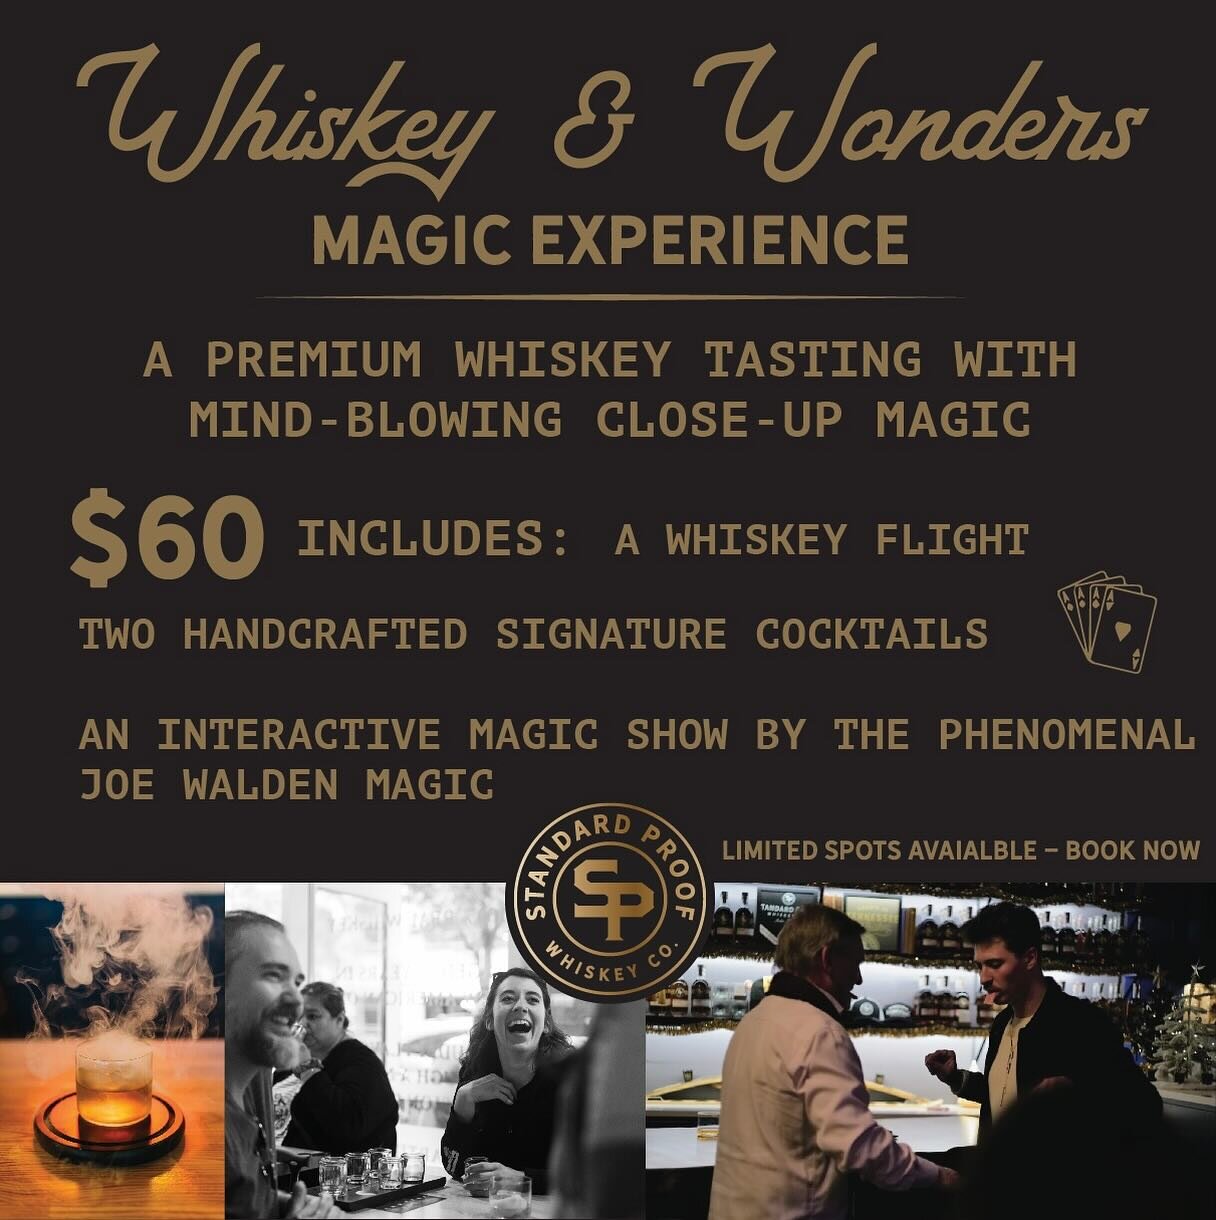 🪄 NEW ATX WHISKEY EXPERIENCE 🪄

Looking for an unforgettable night? ✨Starting Saturday, April 13th 

Whiskey + Wonders Magic Experience blends a premium whiskey tasting with mind-boggling closeup magic for an evening unlike any other. 🪄🎩🐇✨🔮🃏

